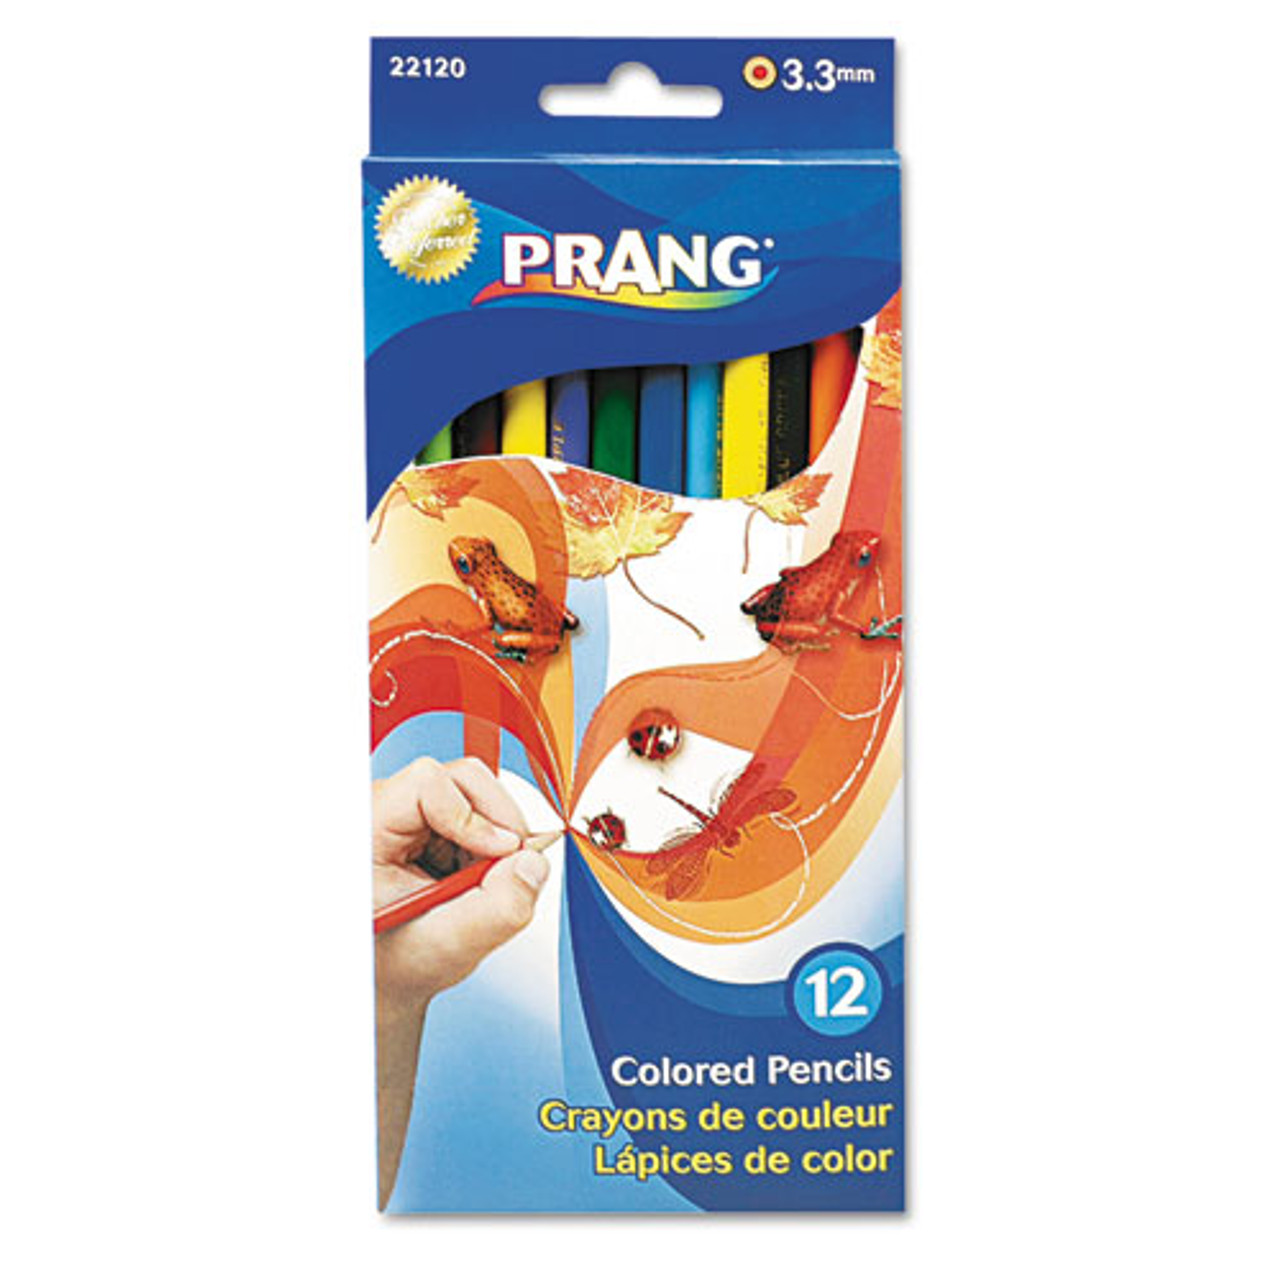 Prang Duo-Color Colored Pencil Sets, 3 mm, 2B (#1), Assorted Lead